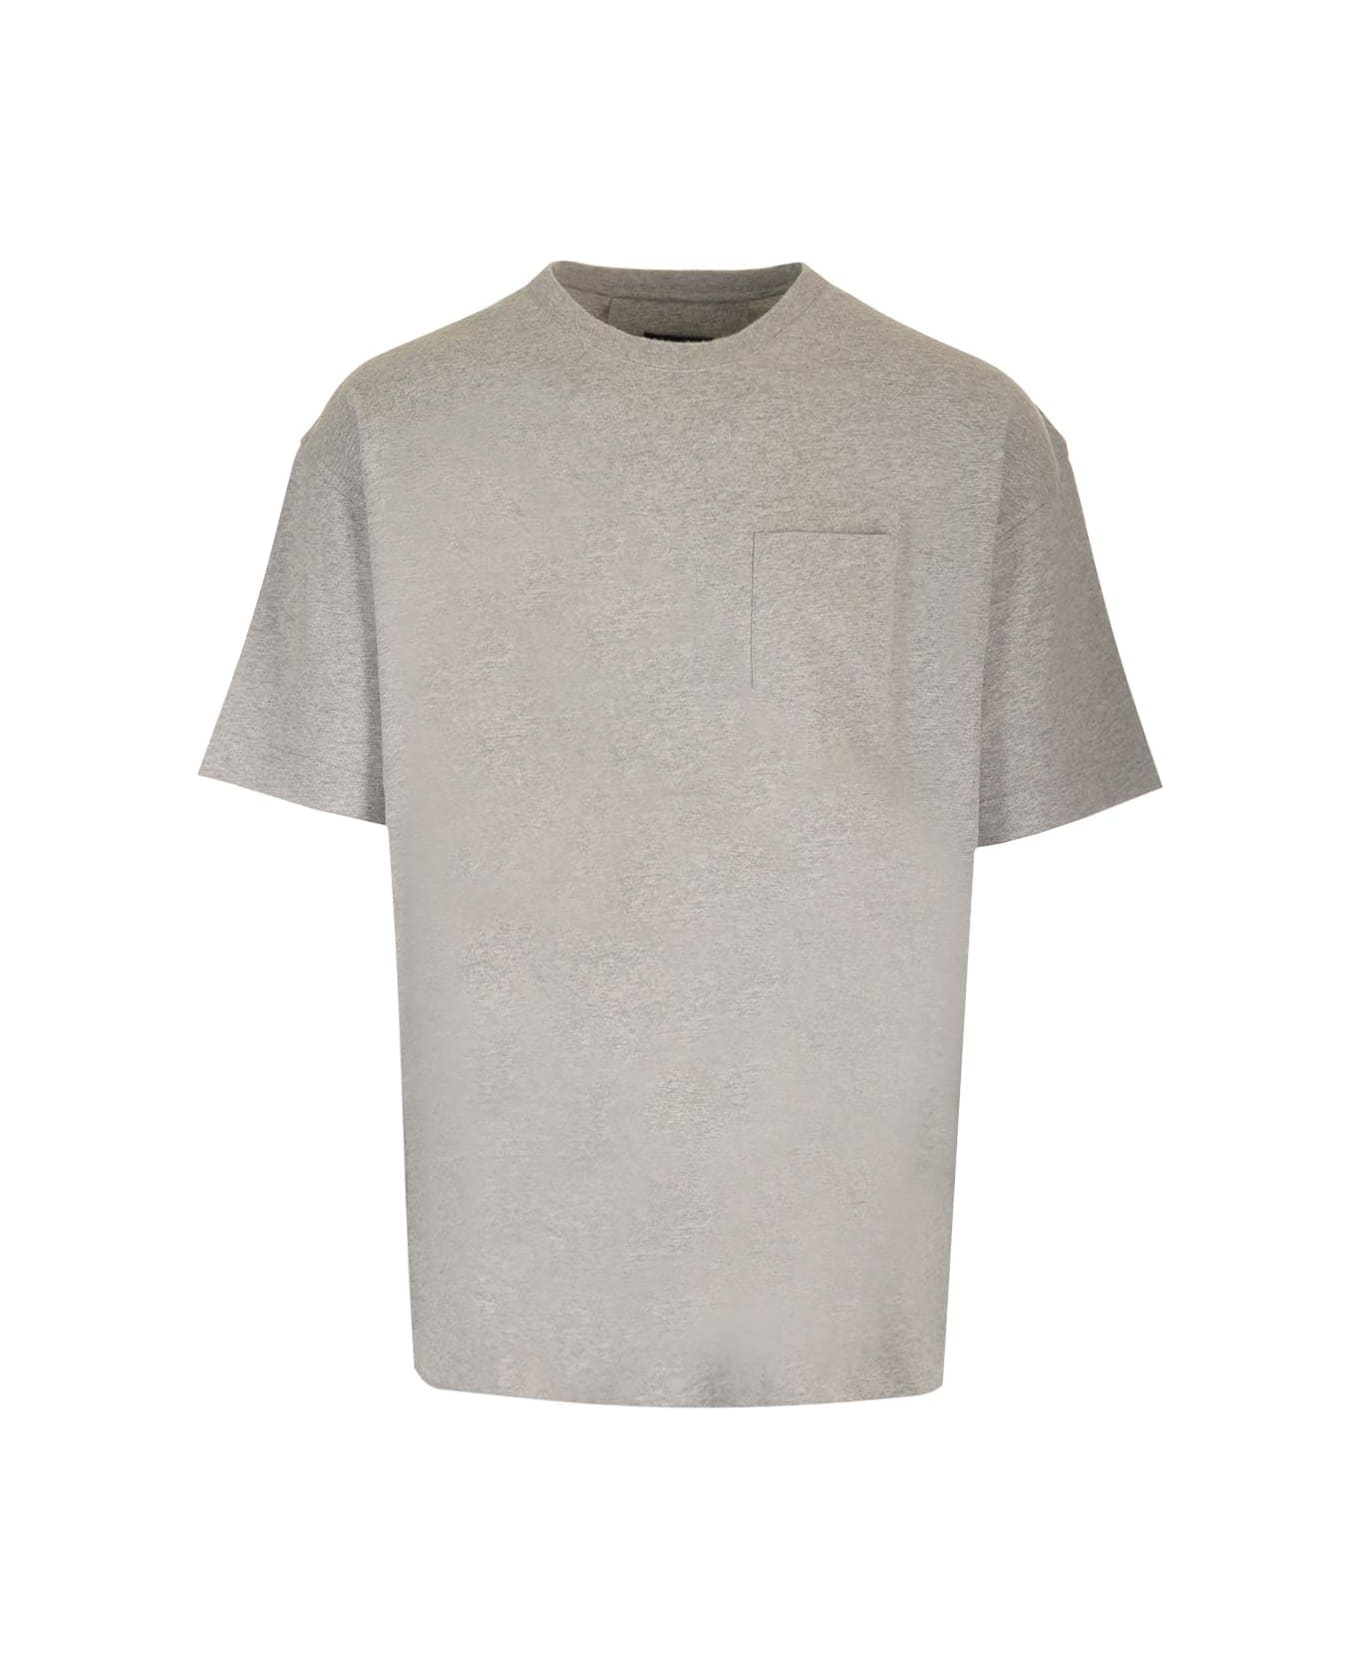 Givenchy T-shirt With Logo - Grey